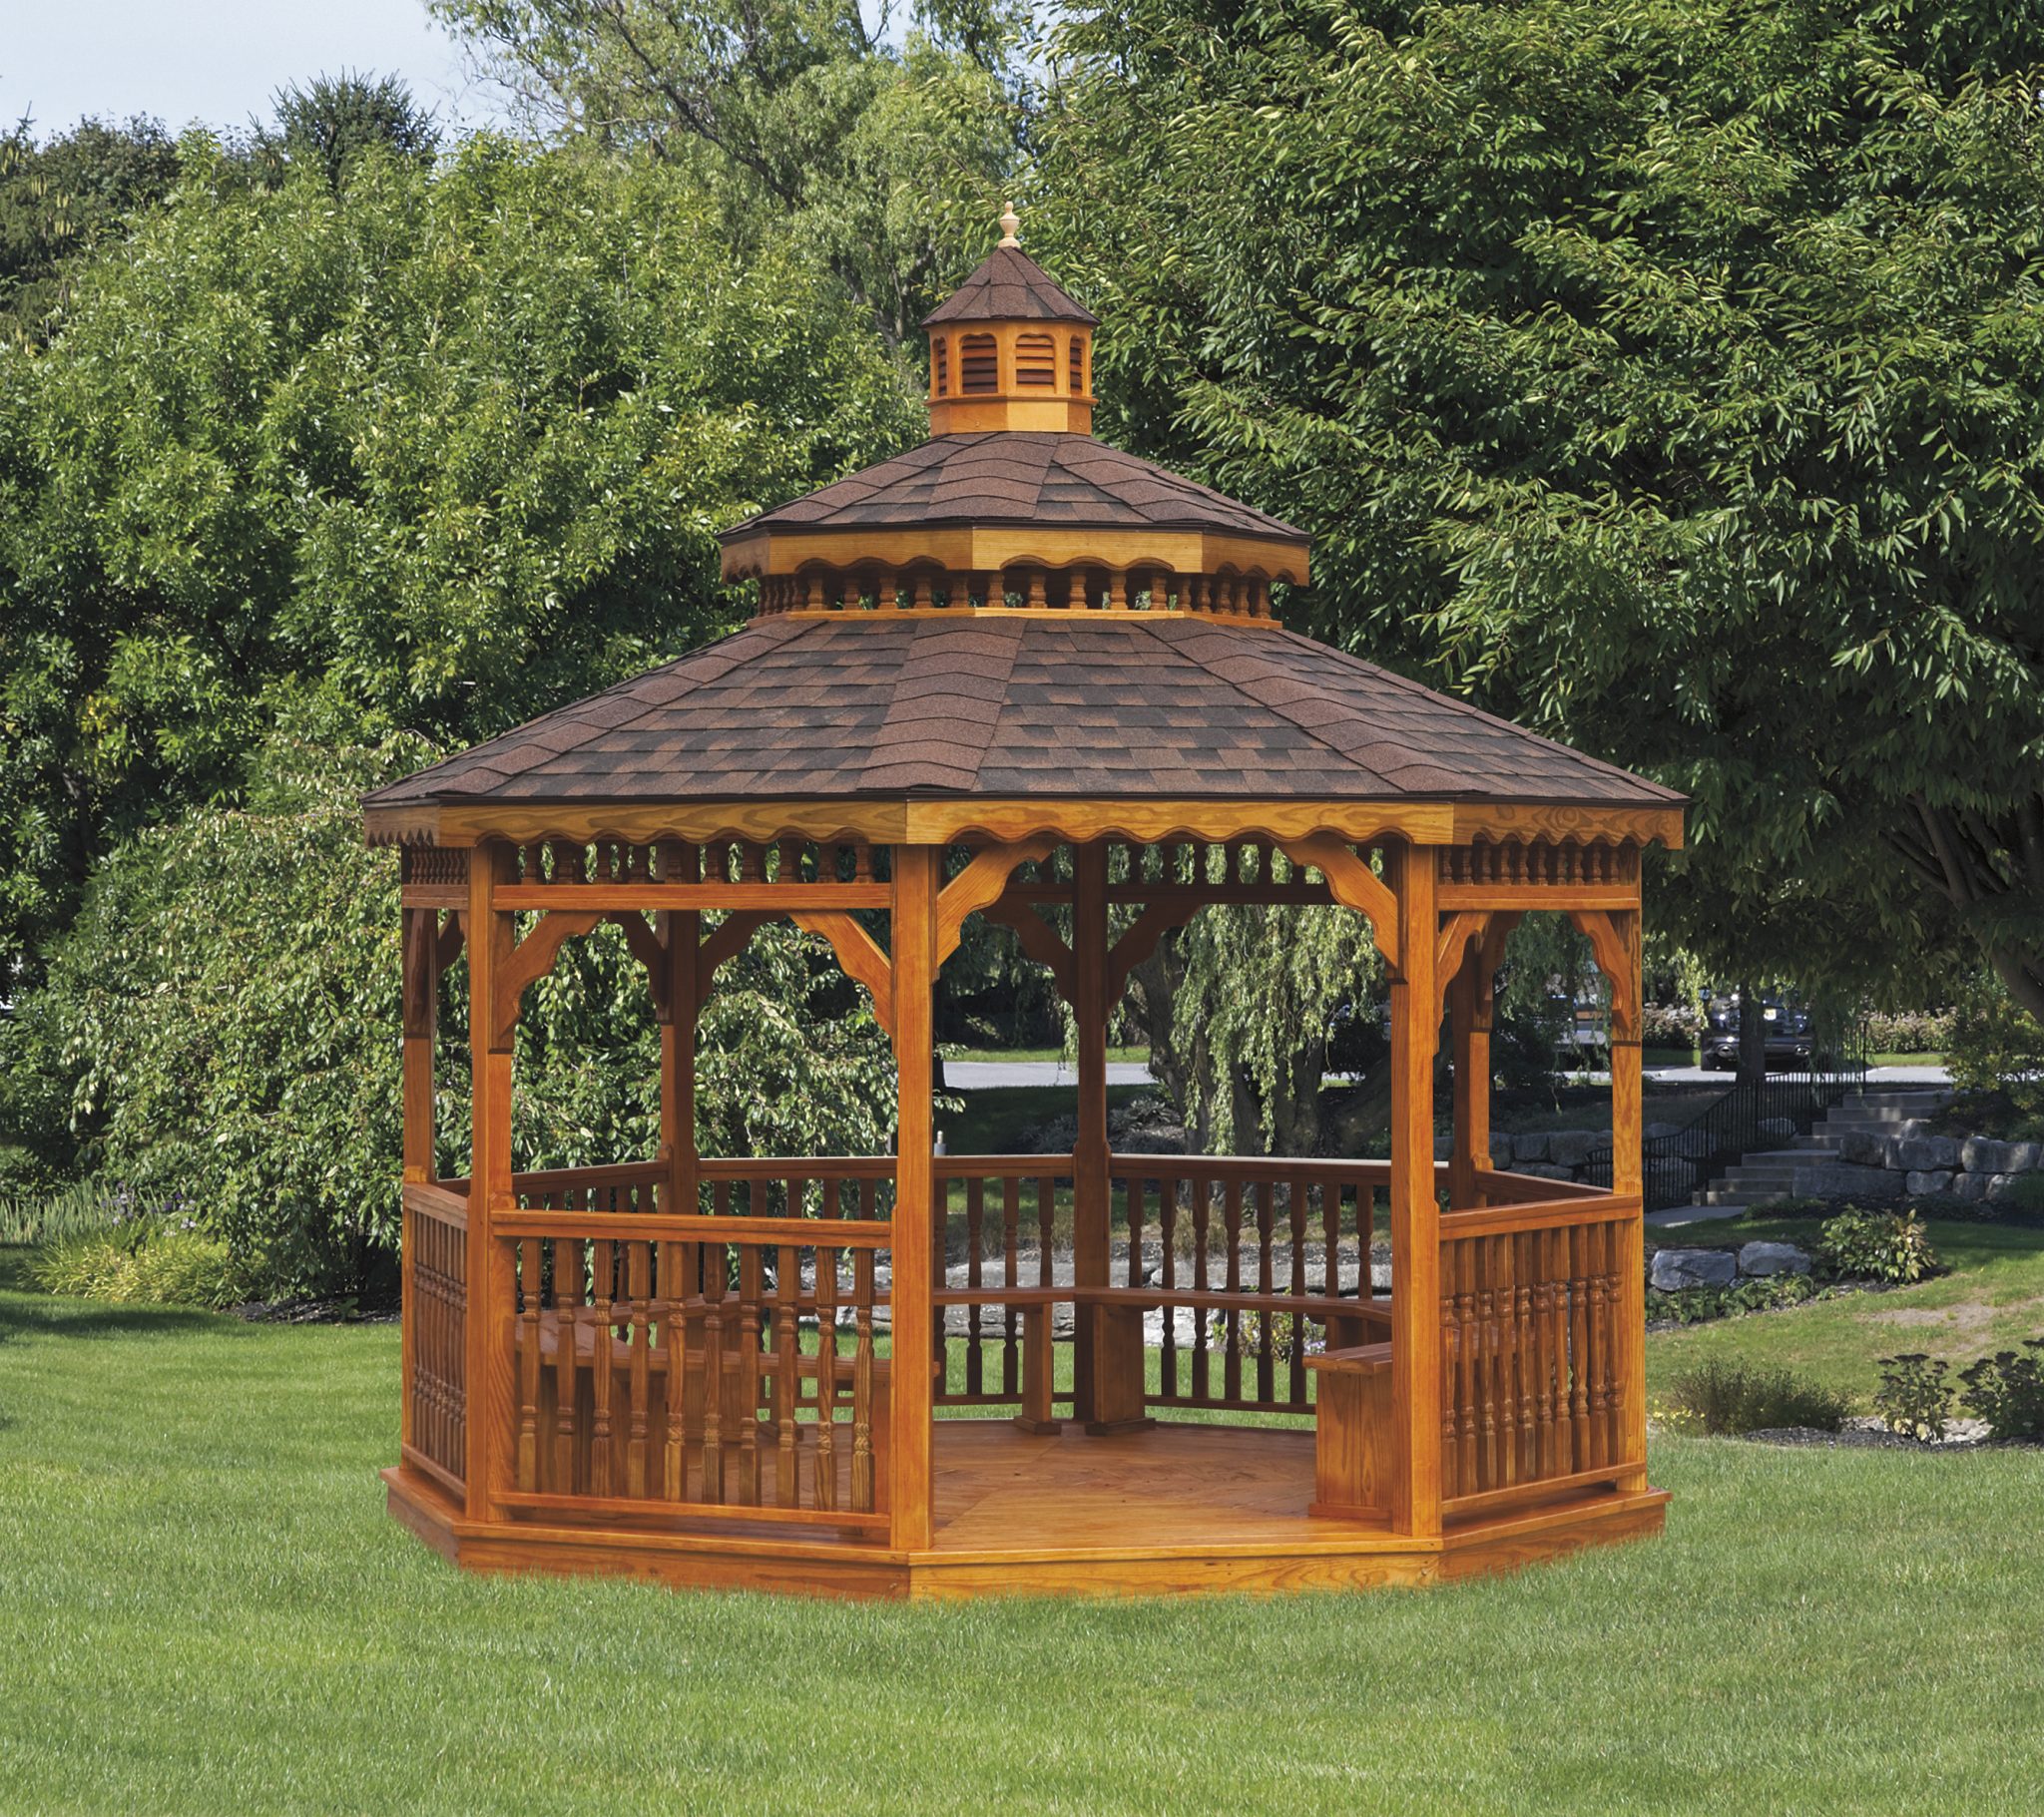 Get a Quote on a Pine Gazebo with a Pagoda Roof - Pine Gazebo Quote 2048x1821